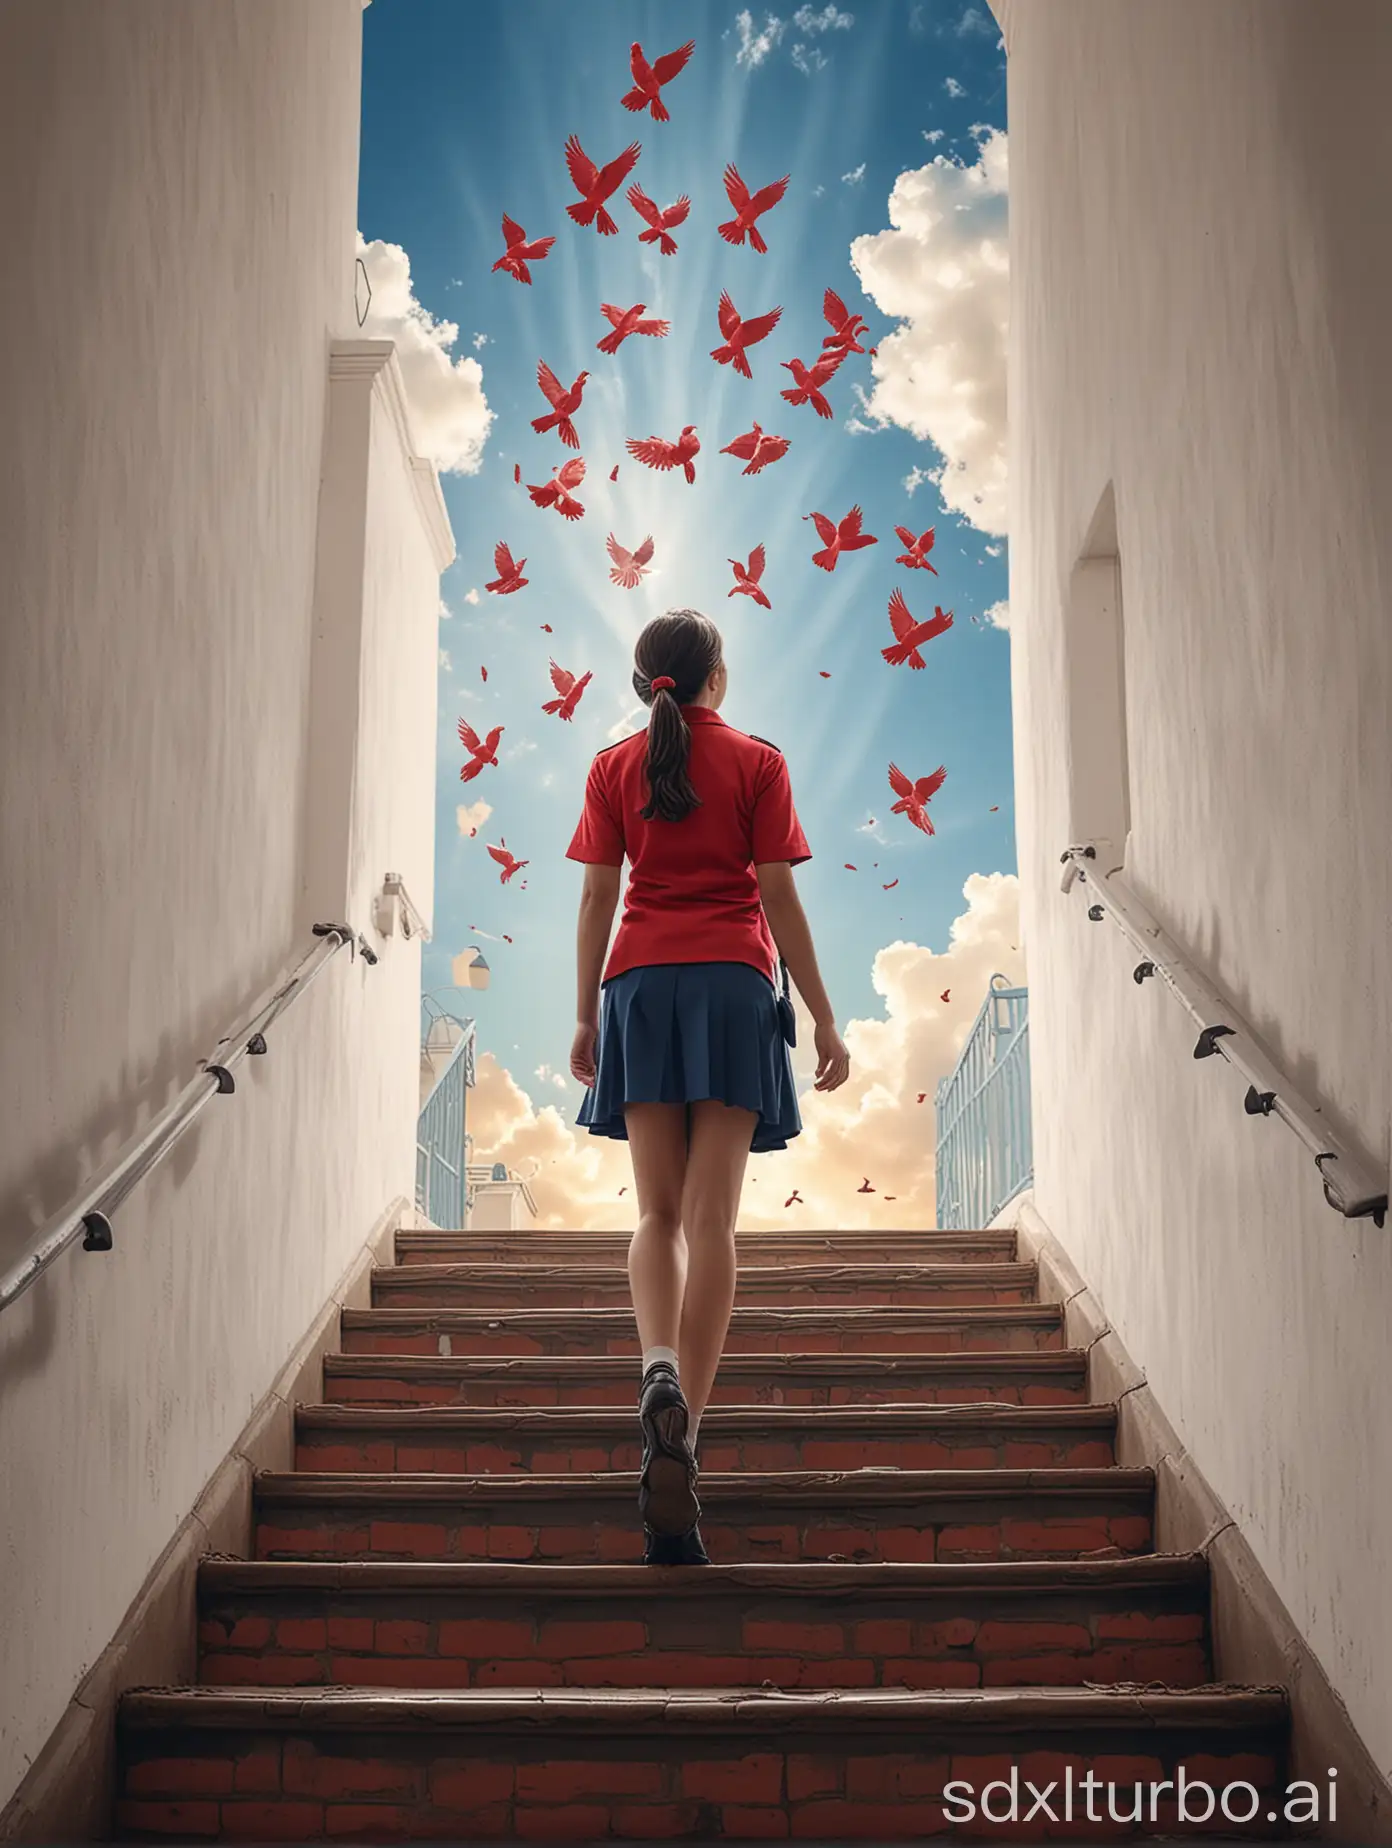 Generate a poster advertising scholarships for disadvantaged students, featuring the image of a girl in uniform standing on stairs gazing up at the sky with three red doves of different sizes as silhouettes in the sky. Poster has no words.